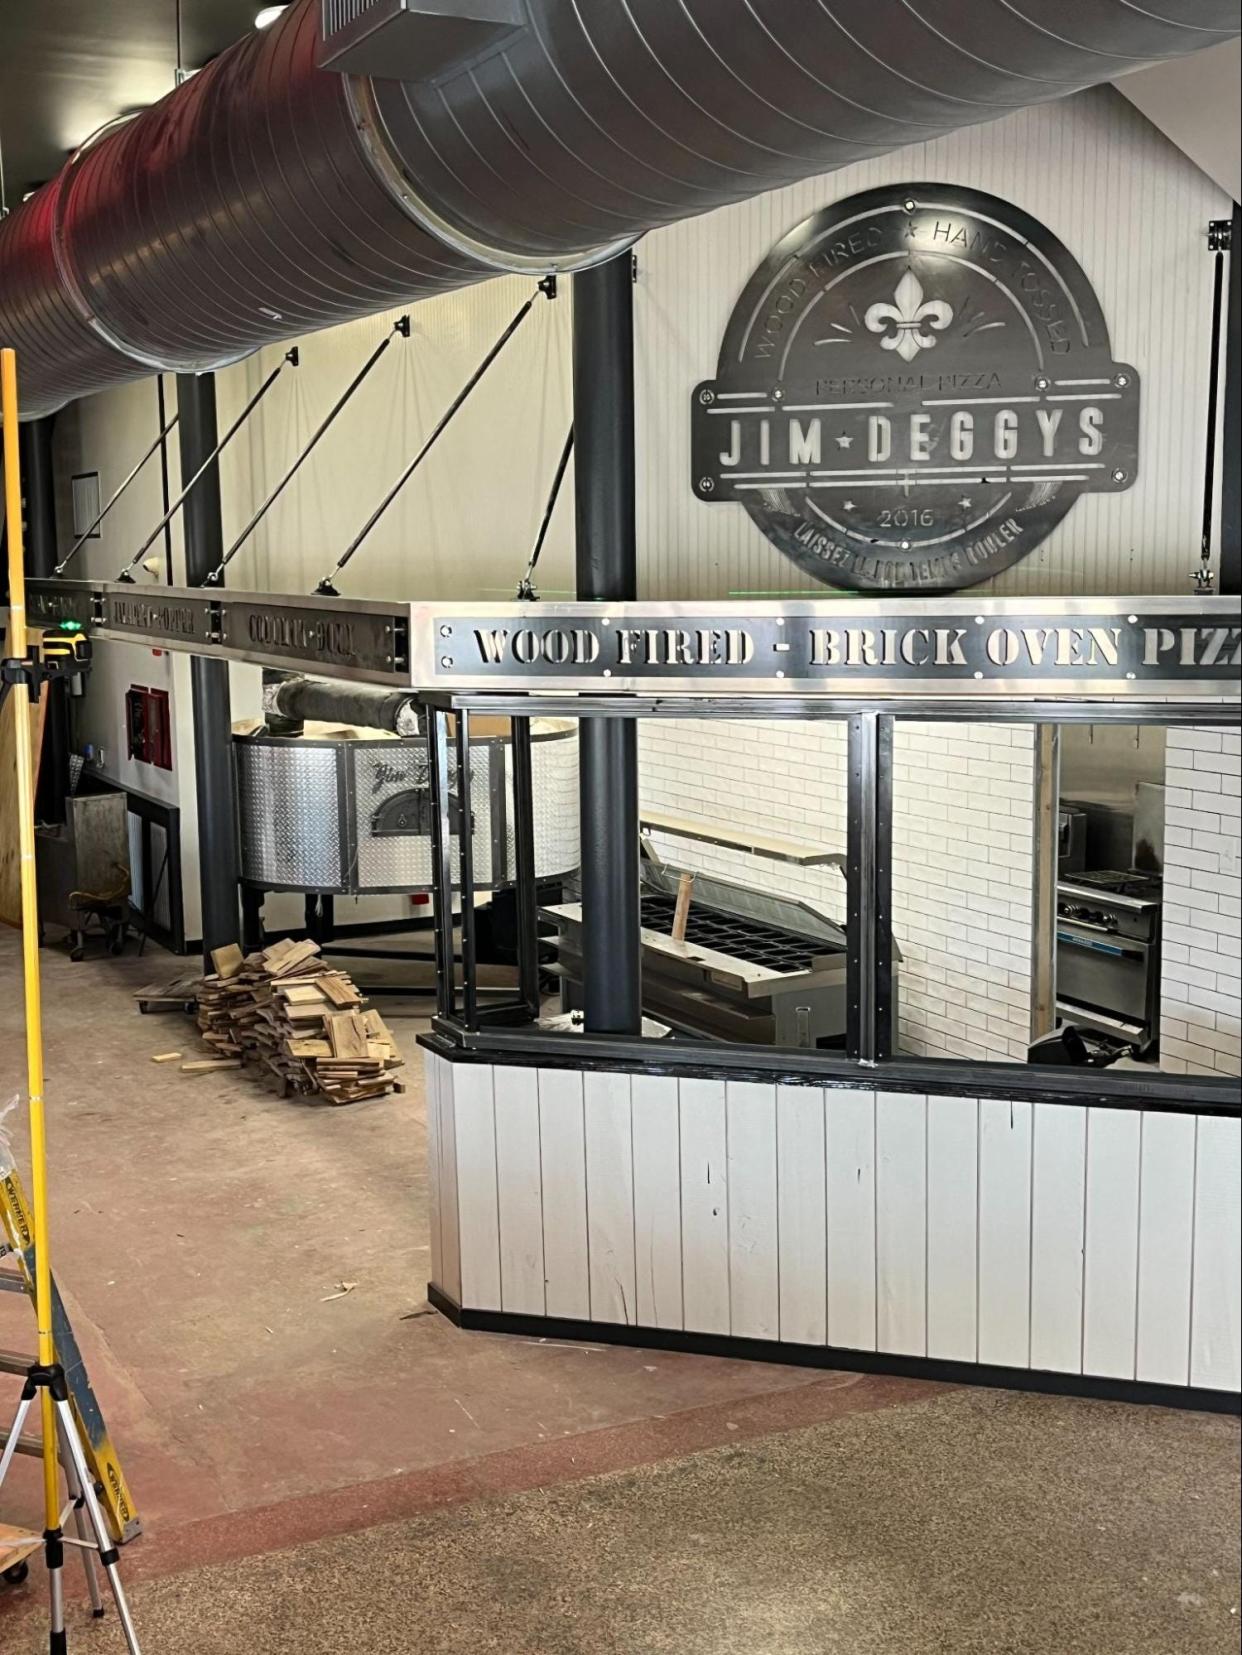 Renovations are underway for Jim Deggys Brick Oven Pizza and Brewery in Lafayette. There are plans to have a soft open in the coming weeks. The restaurant will have pizza, beer and family traditions that span generations.